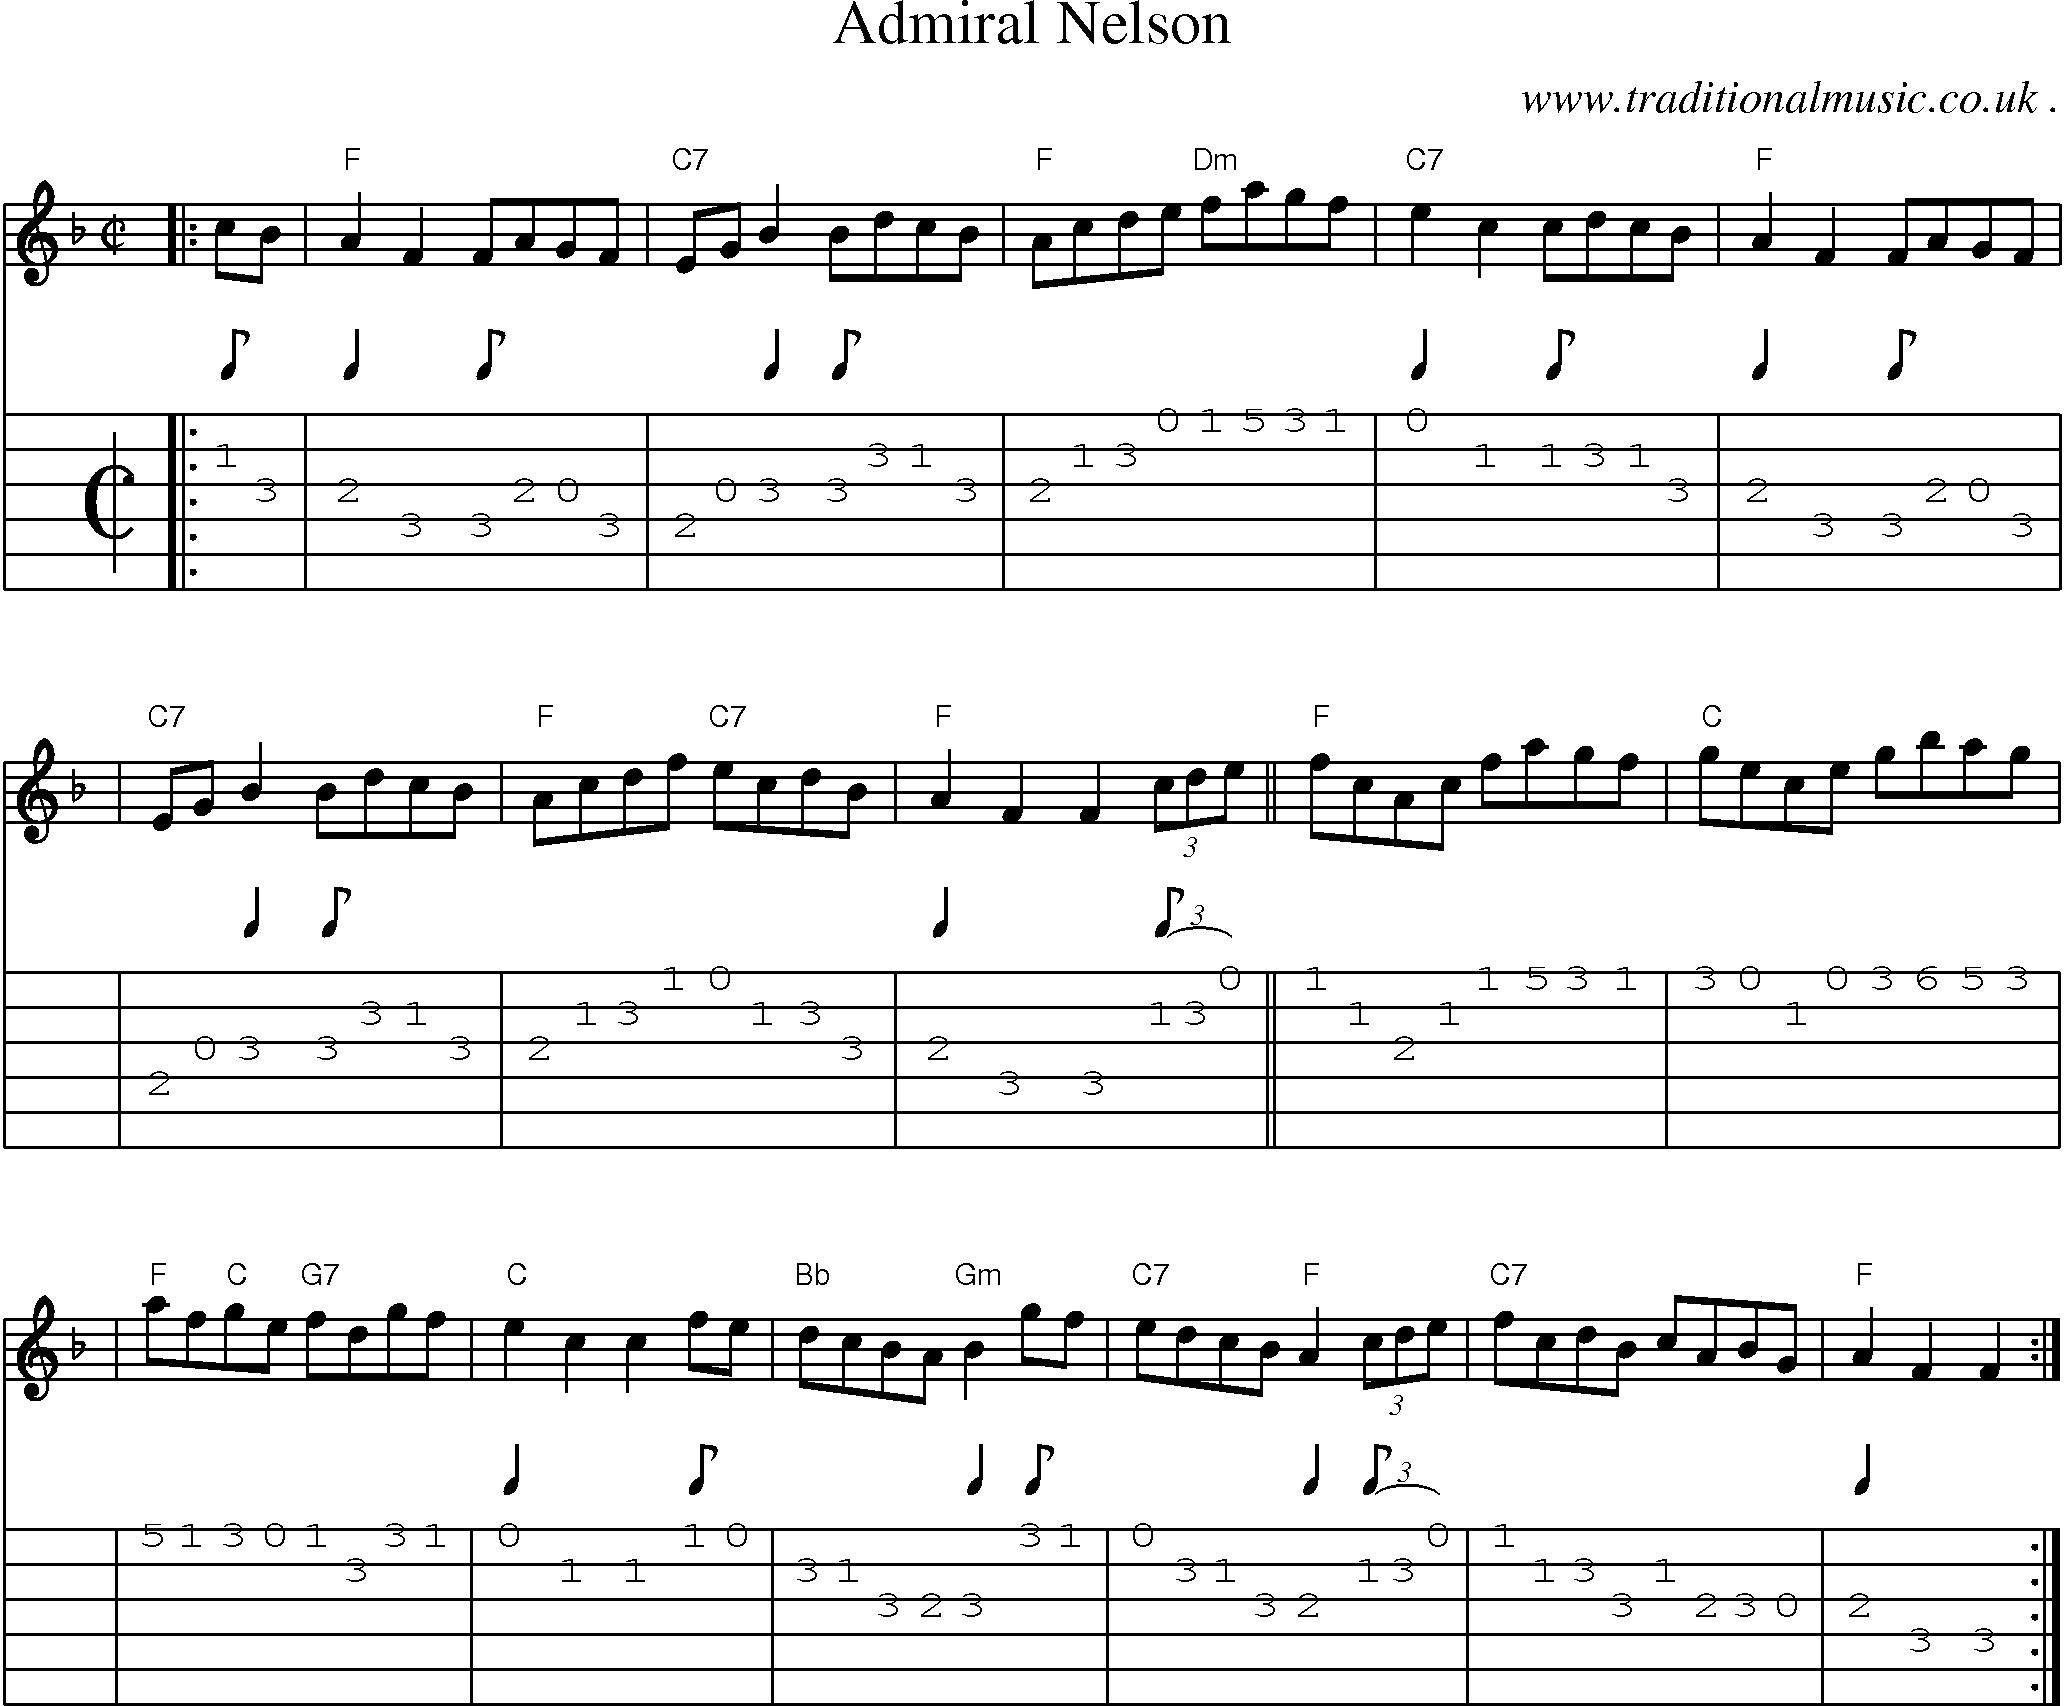 Sheet-music  score, Chords and Guitar Tabs for Admiral Nelson